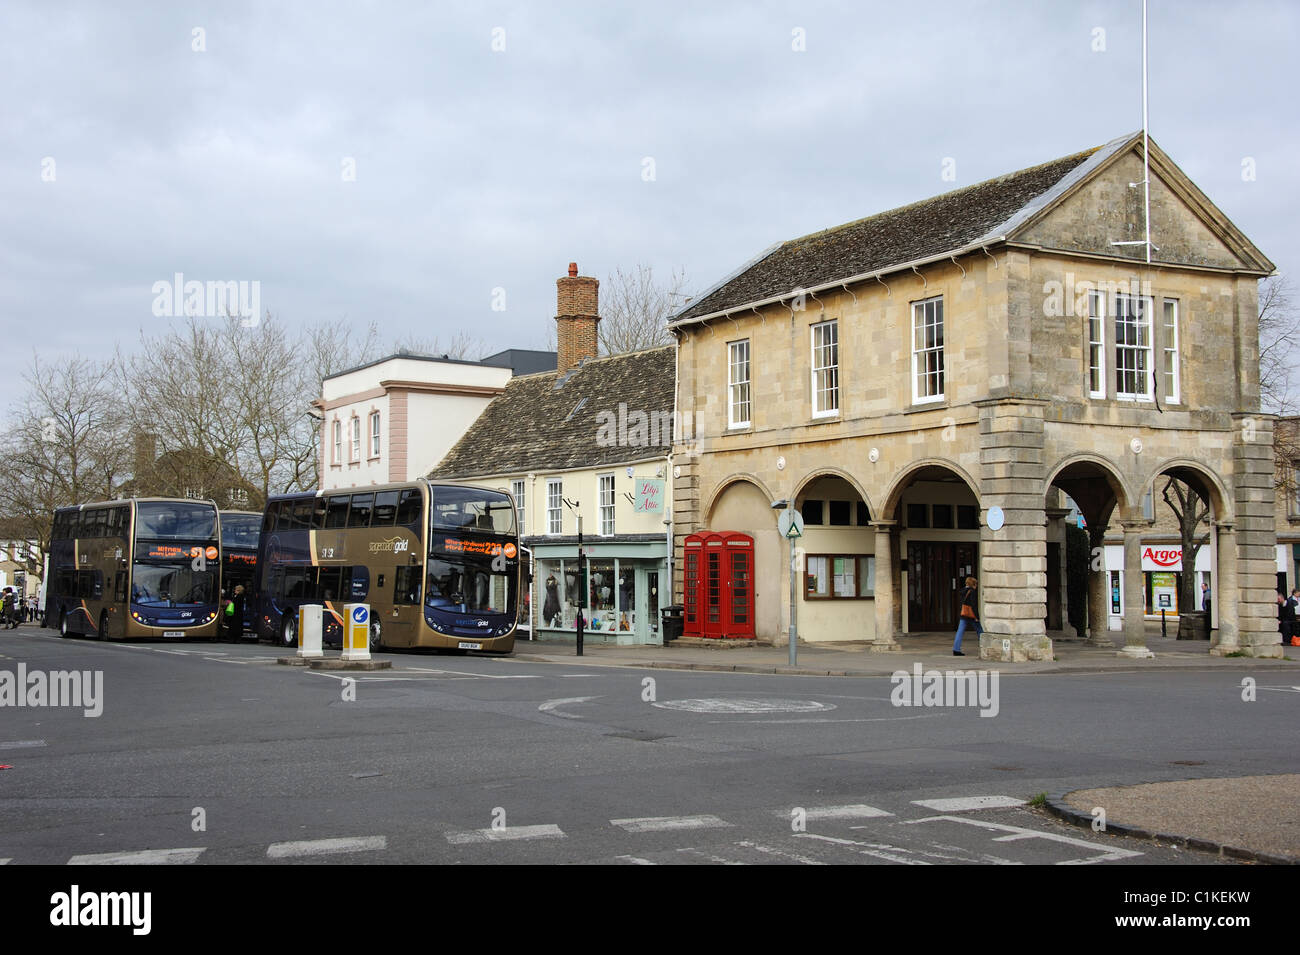 Stagecoach Gold double decker buses outside the historic Town Hall in Witney town centre Oxfordshire England UK Stock Photo